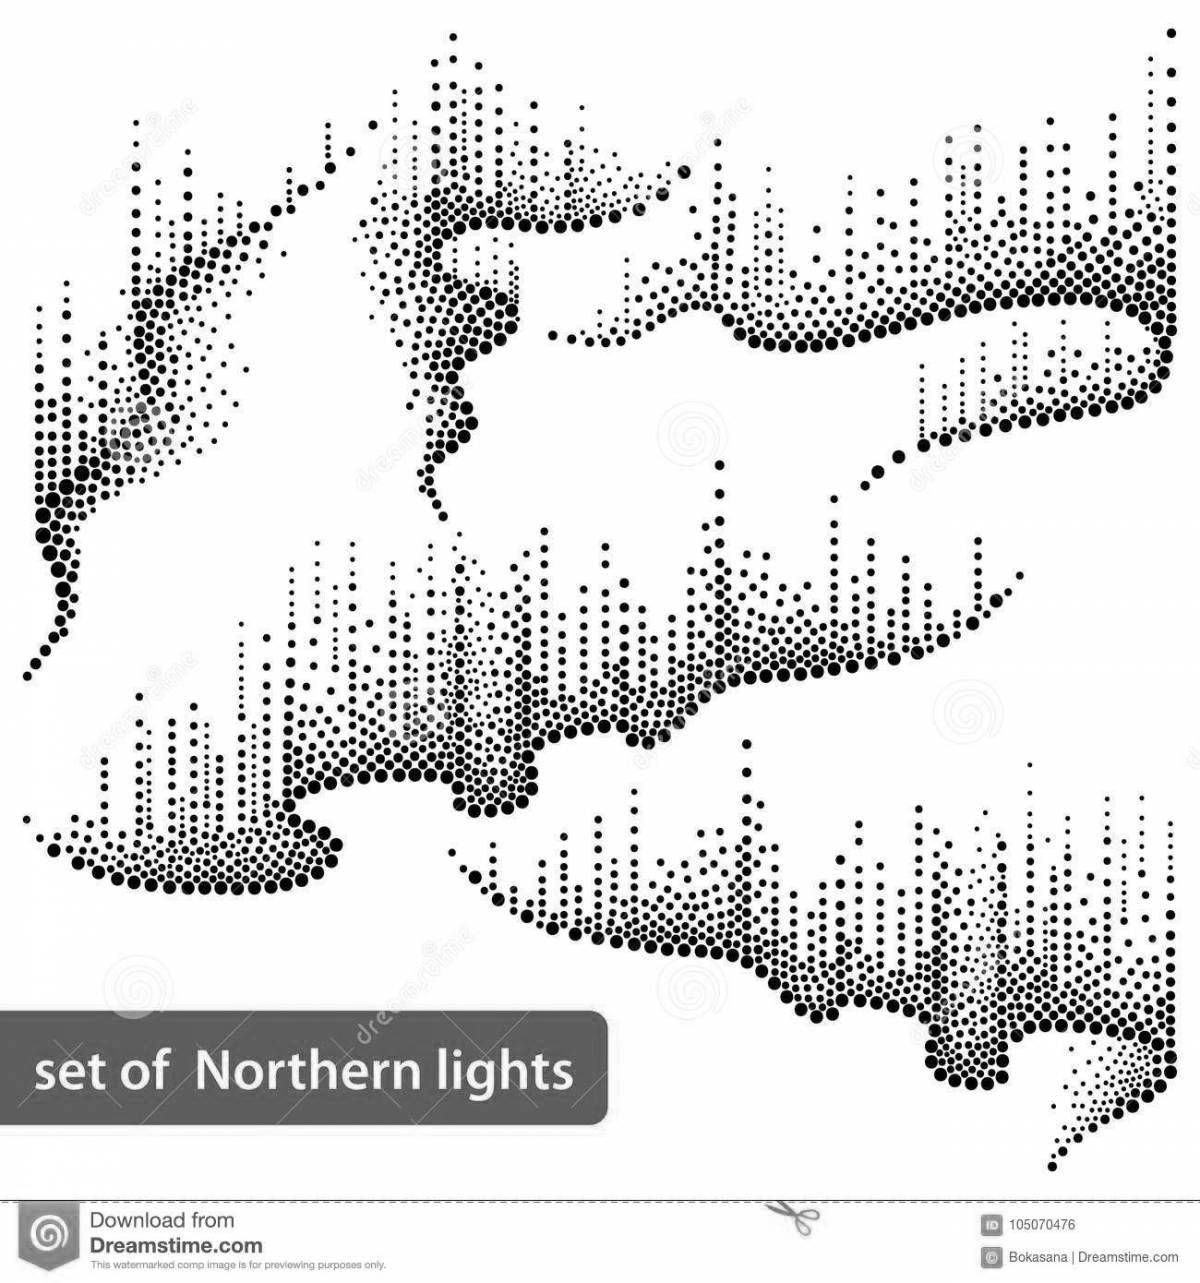 Northern Lights coloring book